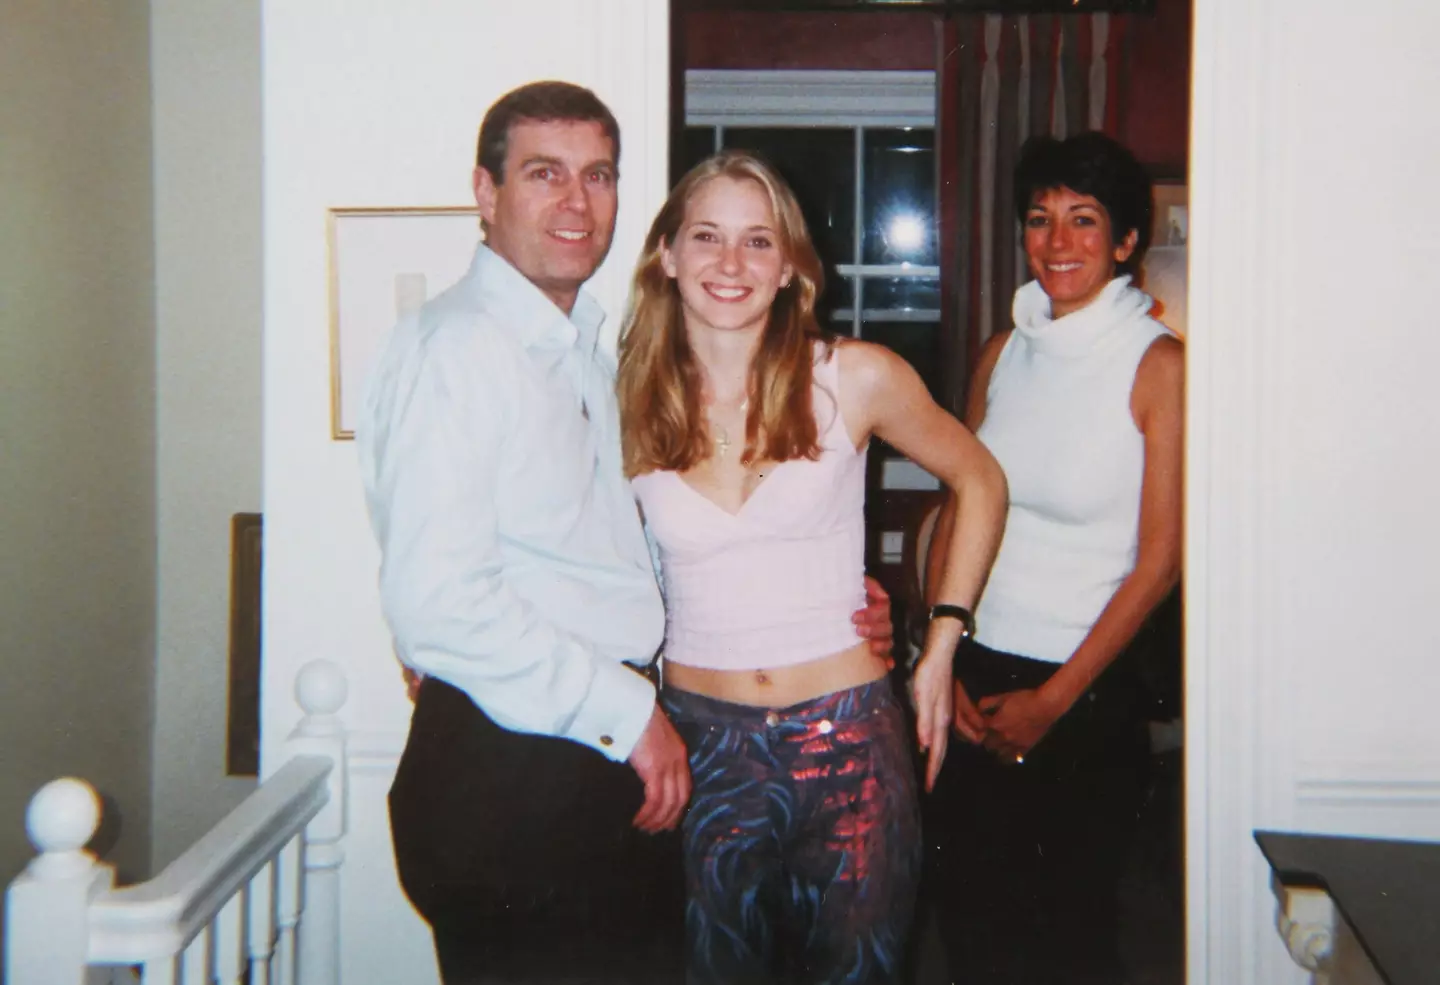 Prince Andrew with Virginia Giuffre in 2001.